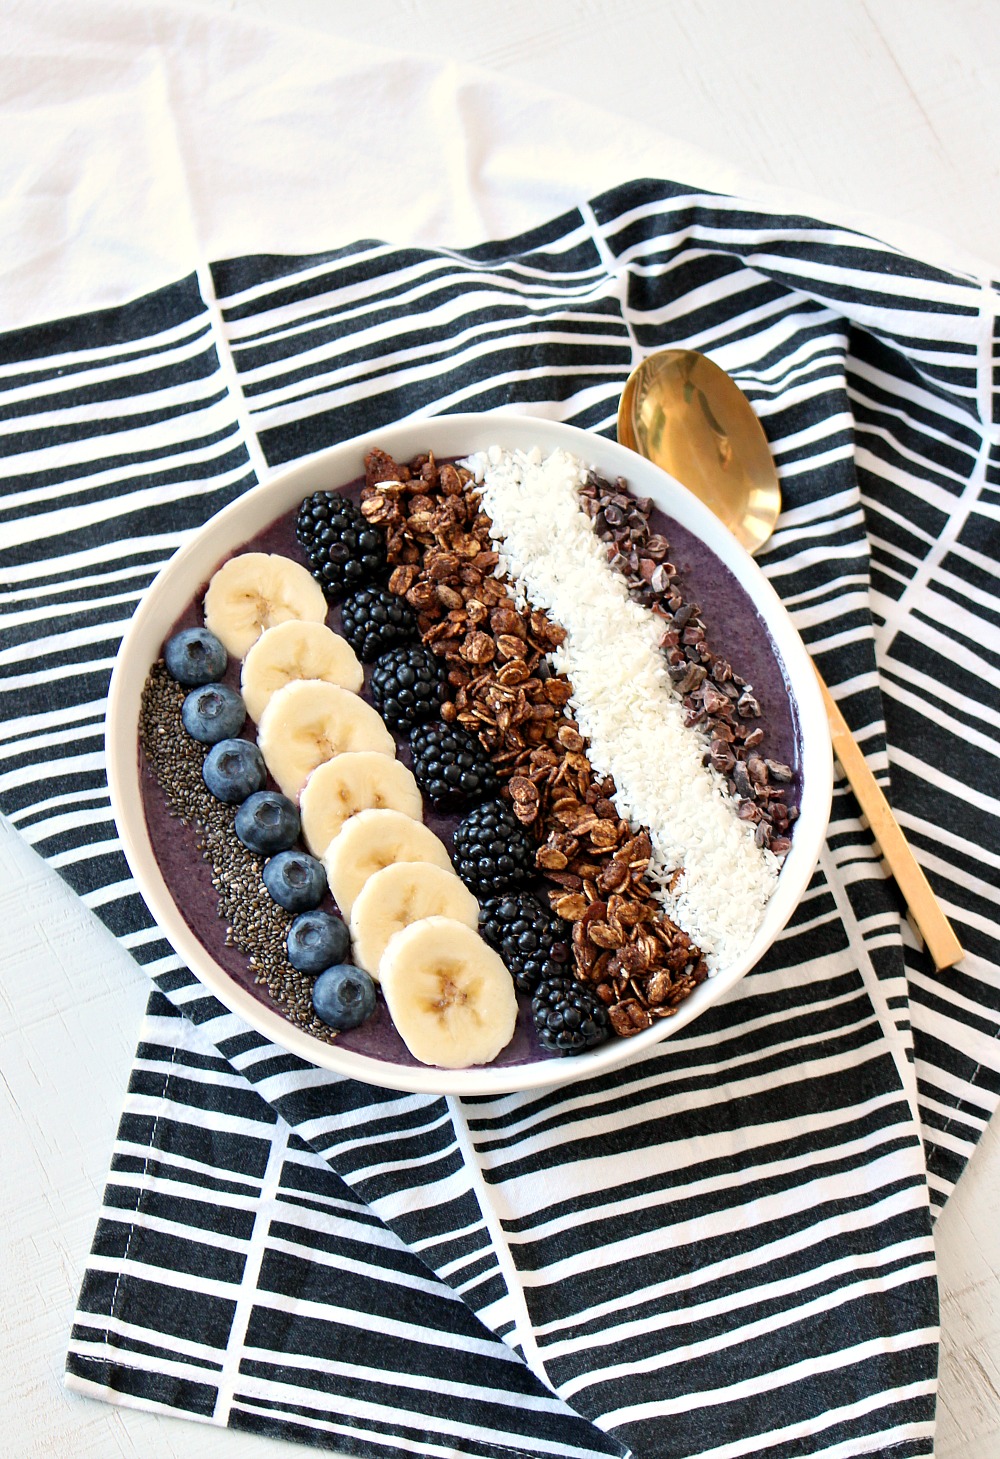 This simple Blueberry Spinach Smoothie Bowl is a delicious breakfast packed with fiber and protein; add your favorite nuts and fruit for a nutritious meal.